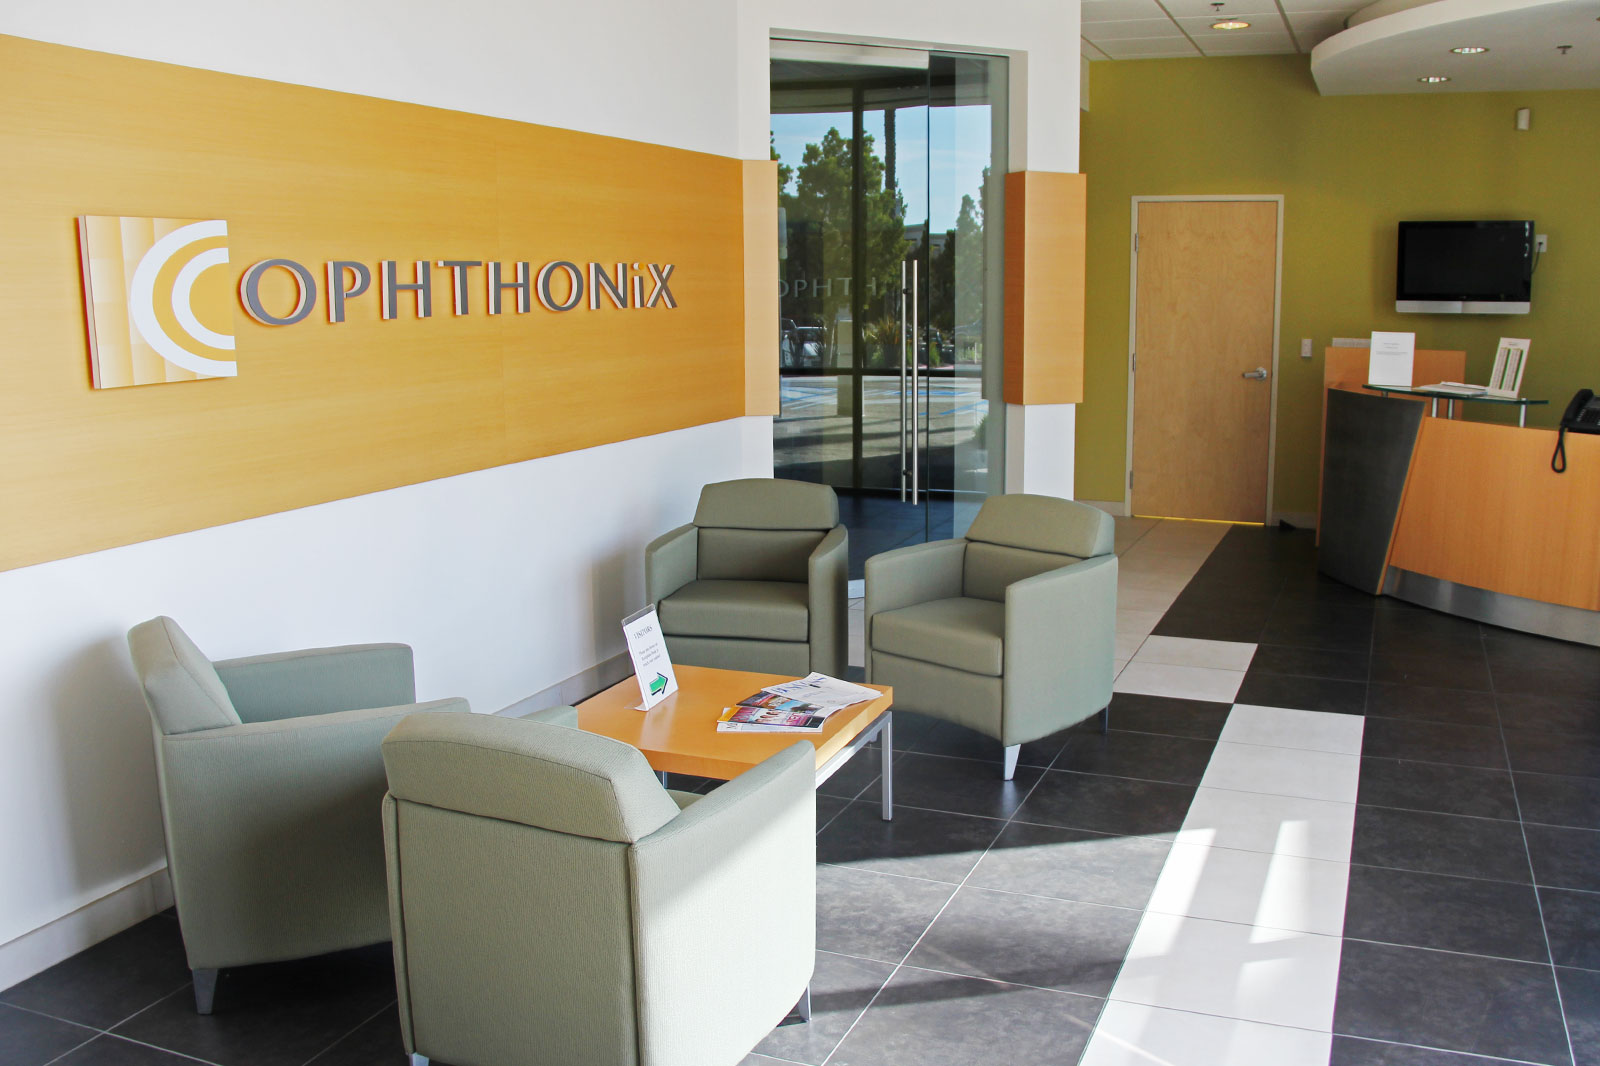 Ophthonix reception area